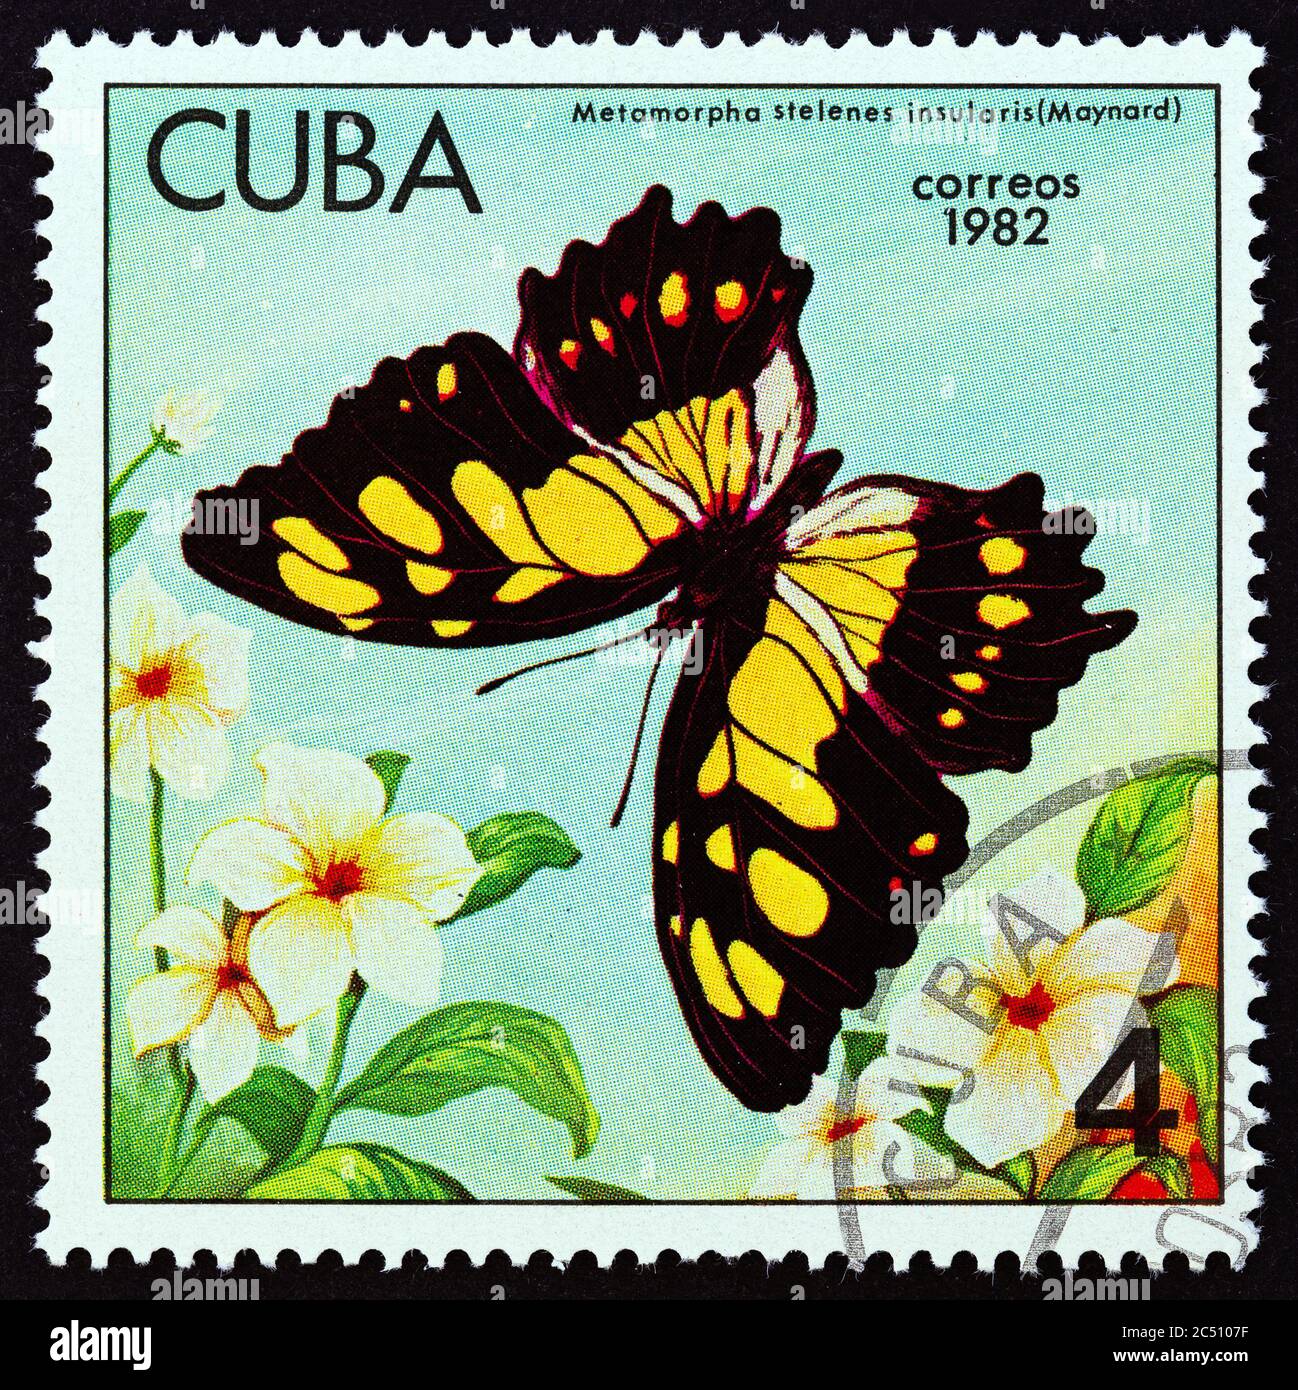 CUBA - CIRCA 1982: A stamp printed in Cuba from the 'Butterflies' issue shows Malachite (Metamorpha stelenes insularis), circa 1982. Stock Photo